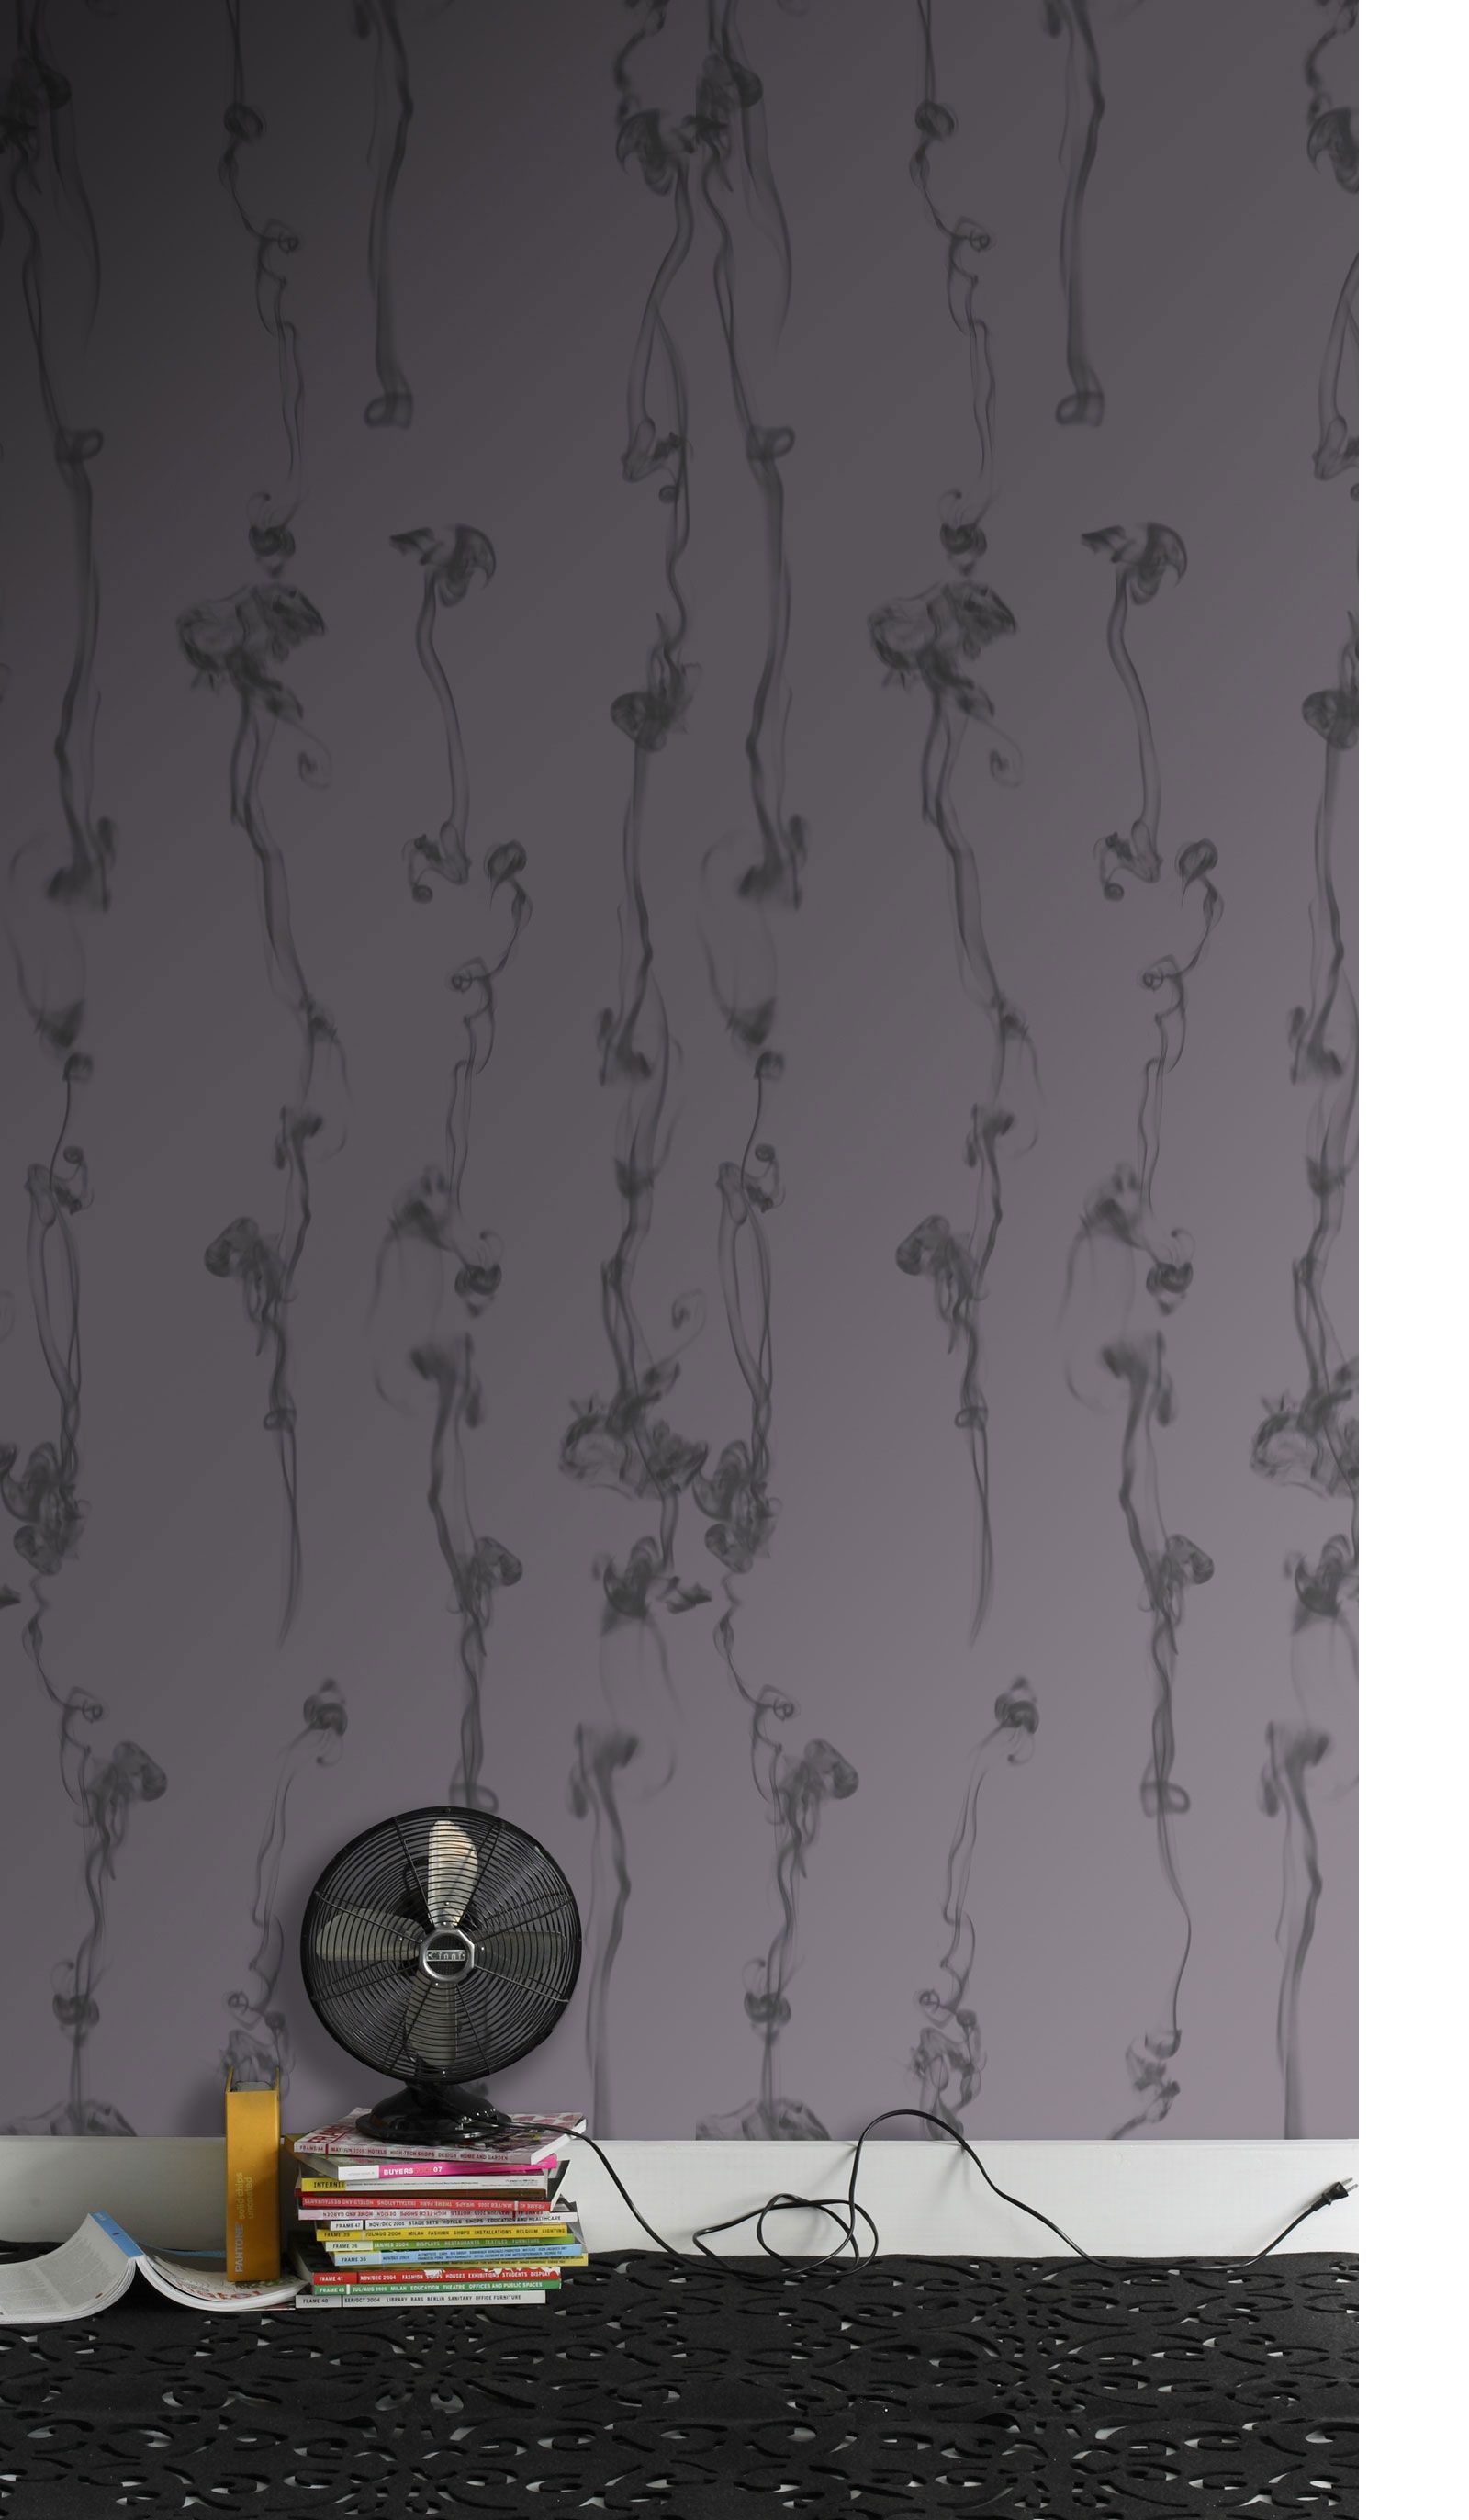 Amazing Wallpaper Selections Like These From Trove Offer A